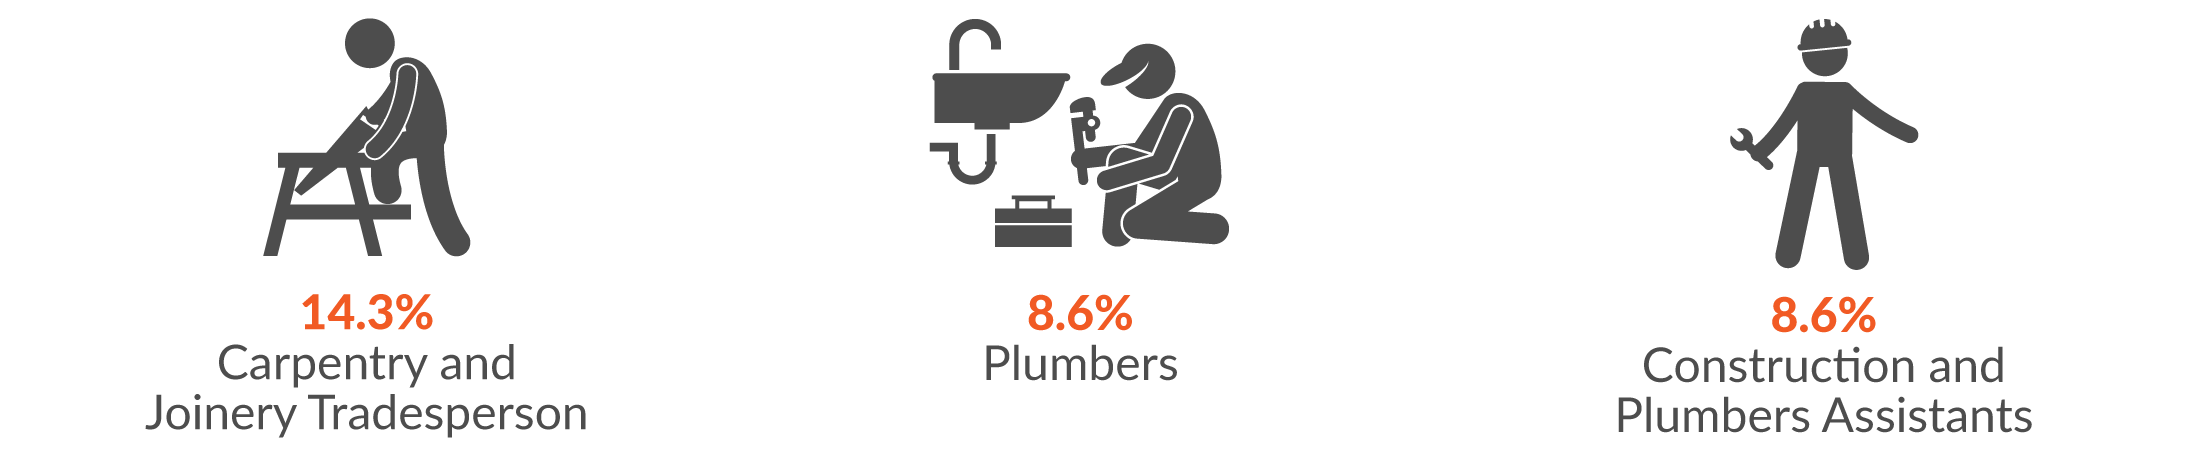 This infographic shows the main occupations by serious injury claims. 14.3% of Construction serious injury claims were made by carpentry and joinery tradespersons; 8.6% by plumbers and construction; and plumber assistants (also 8.6%).